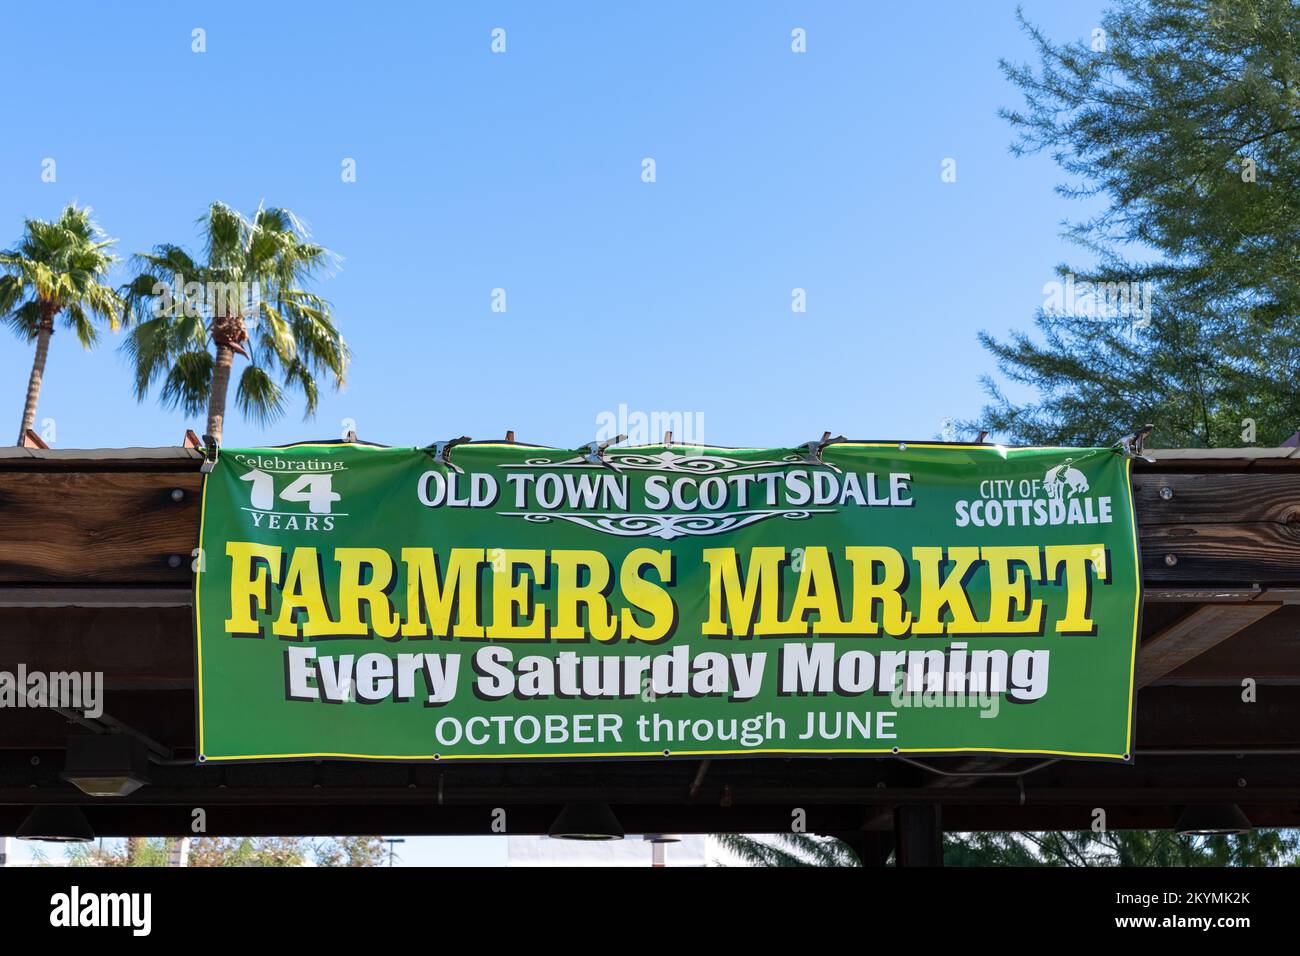 Scottsdale, AZ - Nov. 13, 2022: The Old Town Scottsdale Farmers Market is every Saturday morning from October through June. Stock Photo